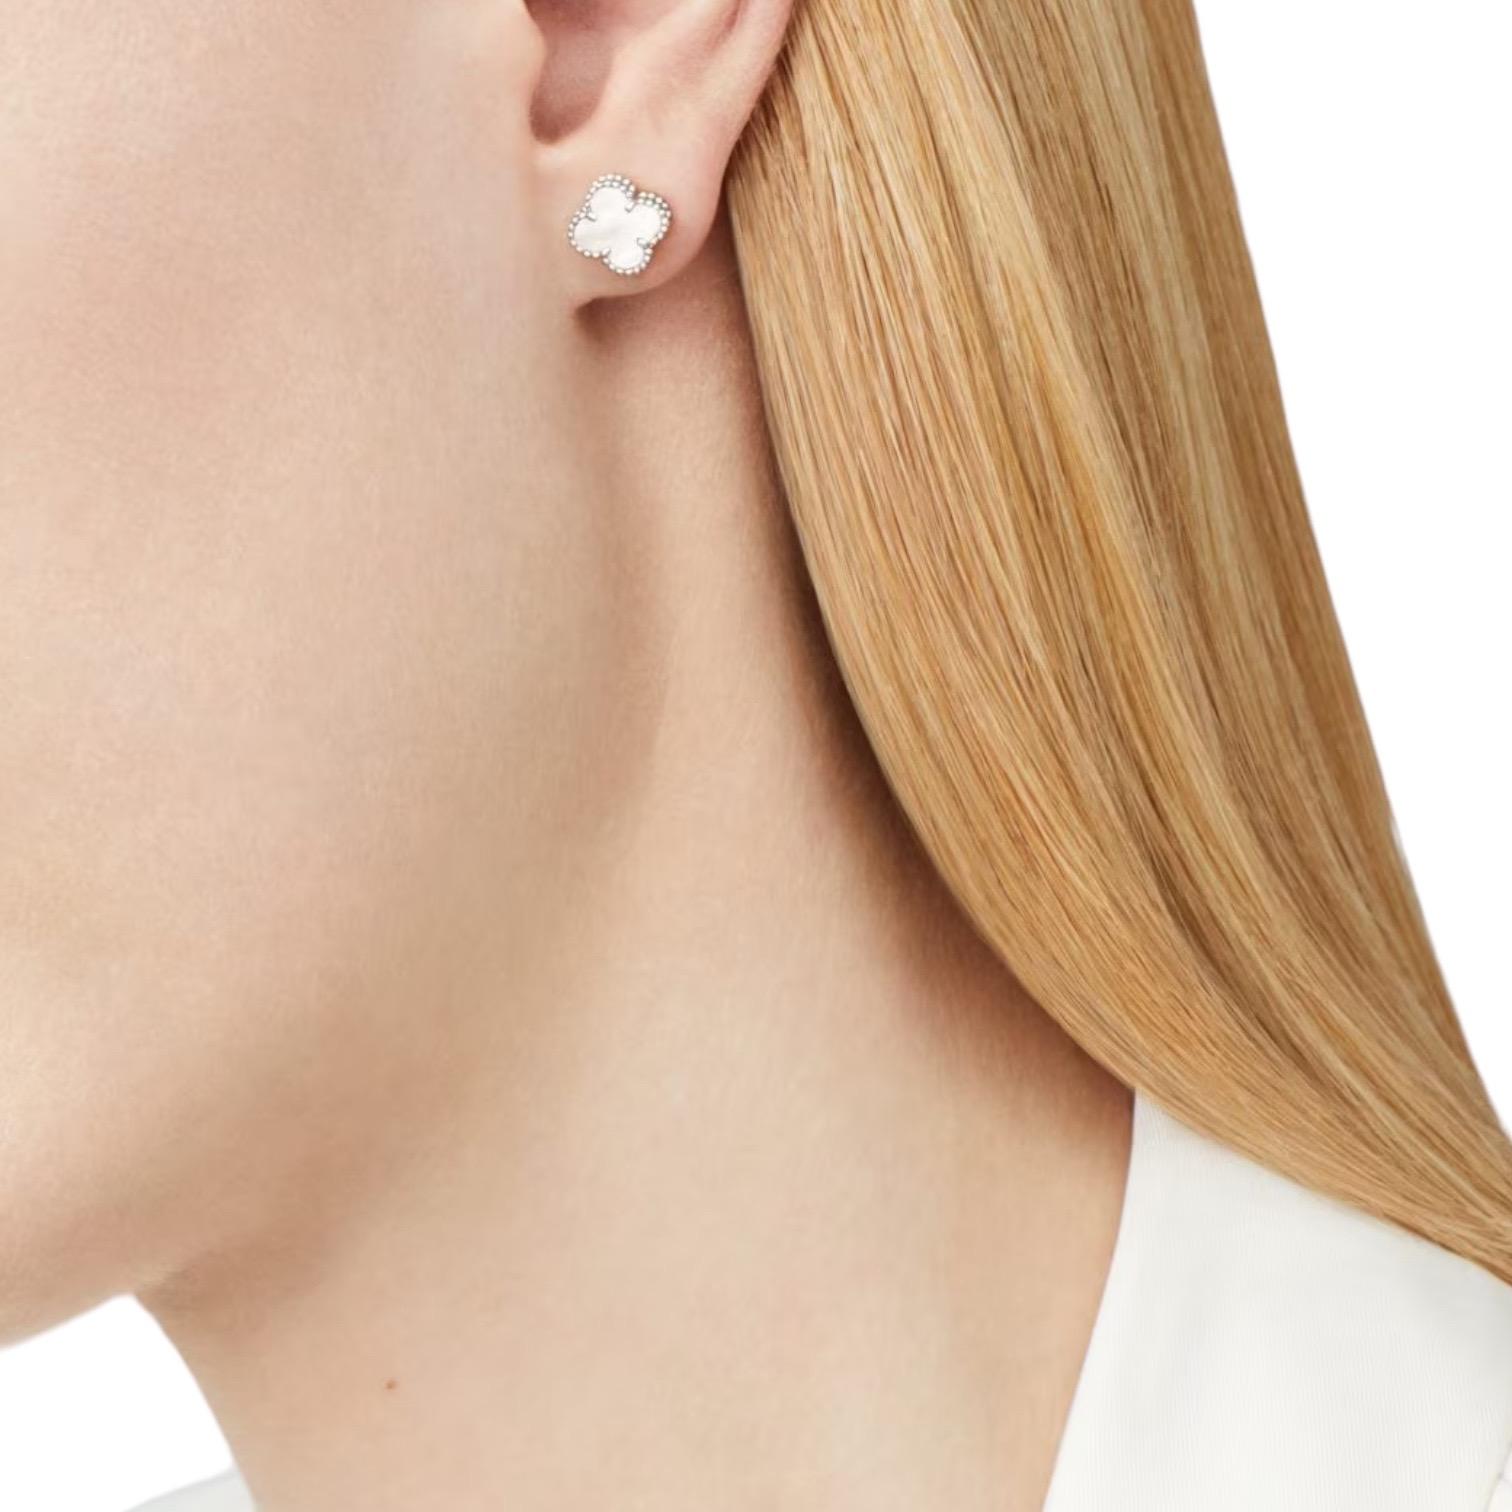 Experience pure elegance with our 'Lustrous Harmony' earstuds, a Van Cleef & Arpels creation crafted from 18k white gold. These sophisticated earstuds showcase the iconic clover design, inlaid with iridescent mother of pearl for a touch of serene